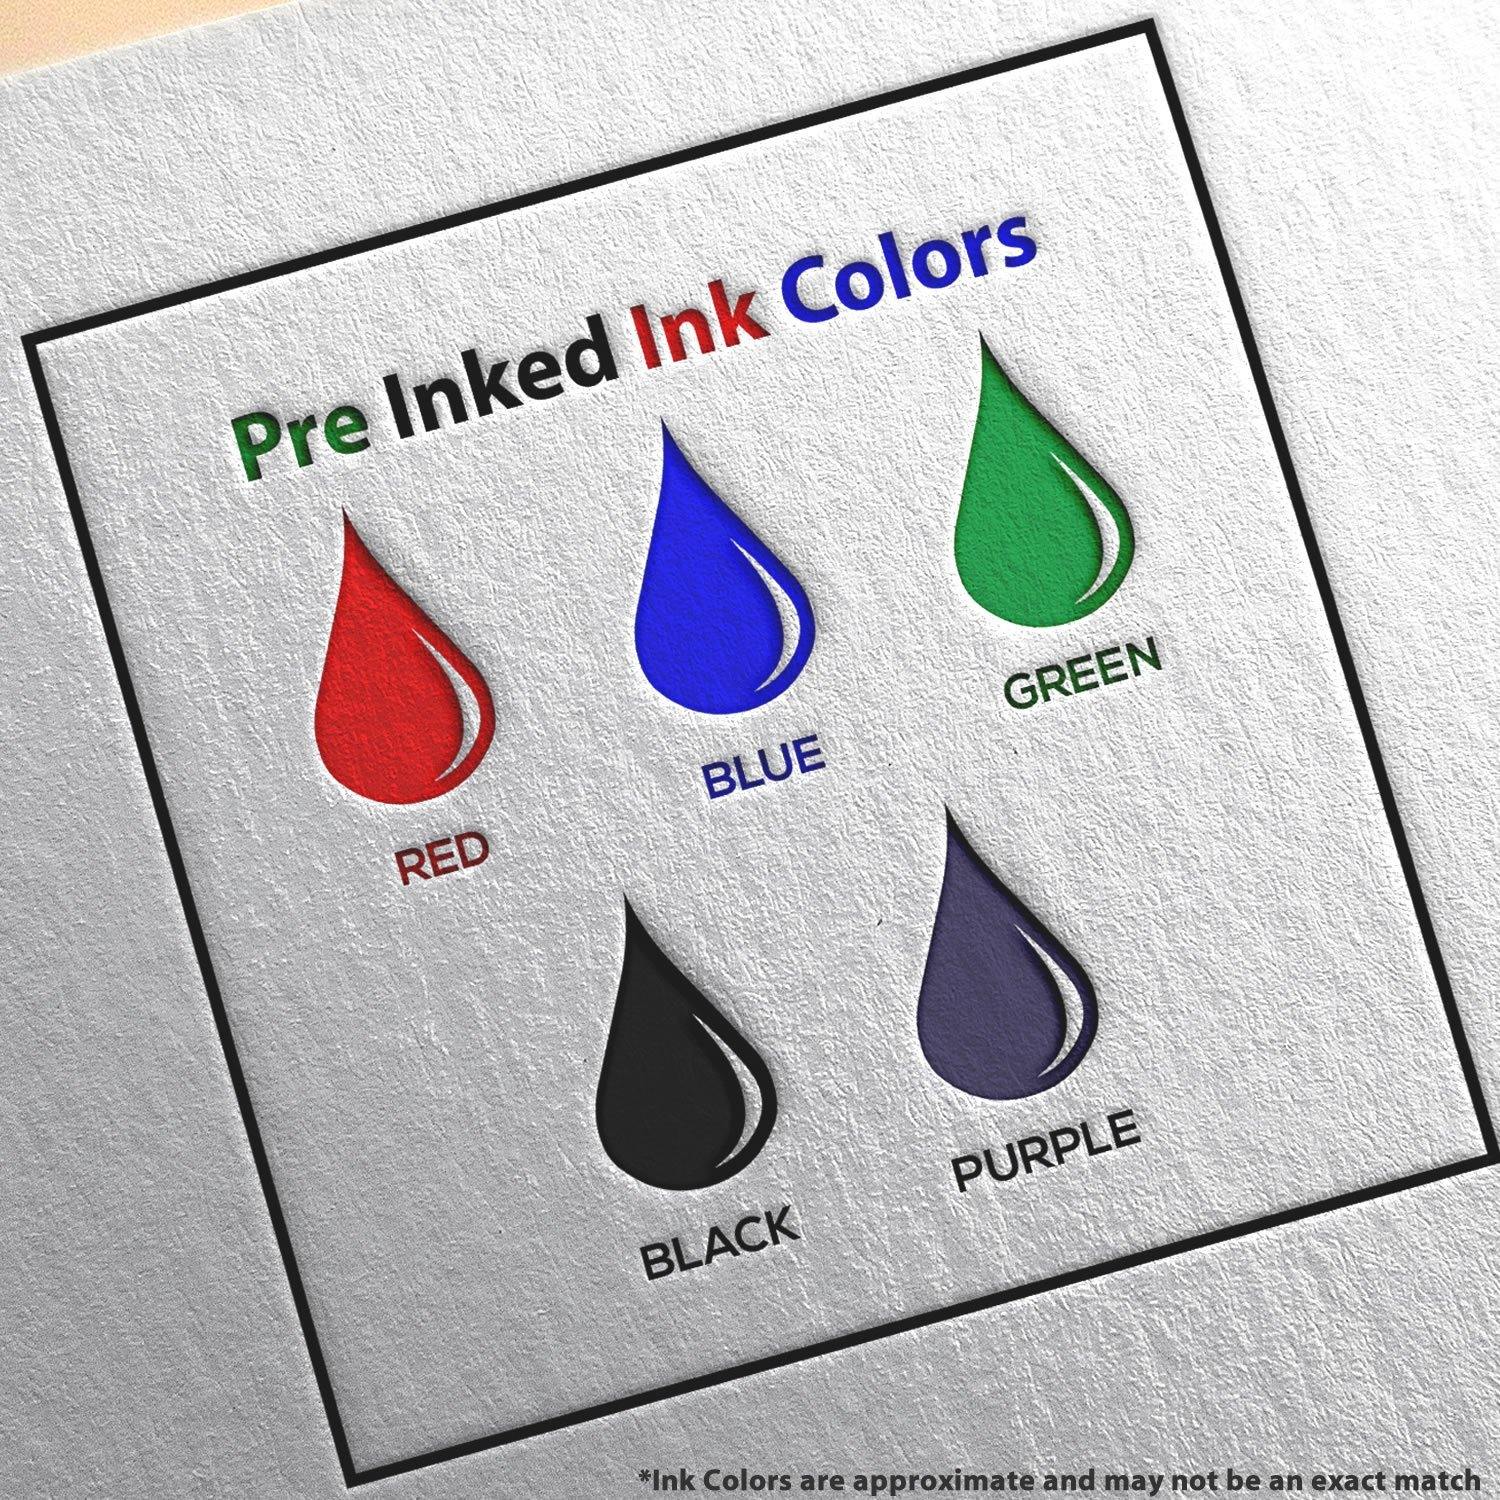 Large Pre Inked Faxed Stamp Ink Color Options